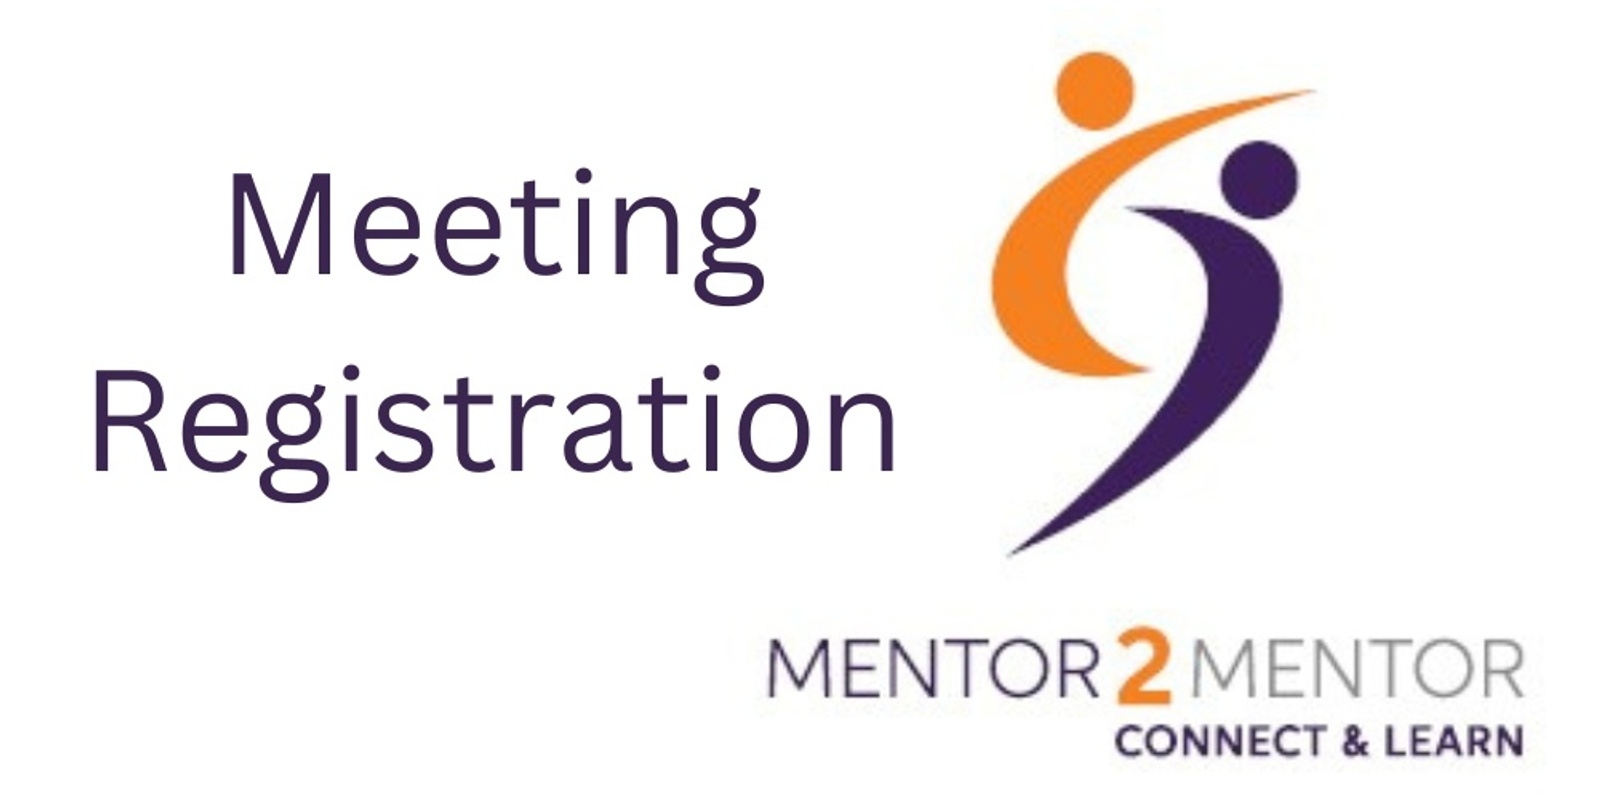 Banner image for 6:45am Mentor2Mentor Connect and Learn Meeting- Look See Meeting 1 and 2 